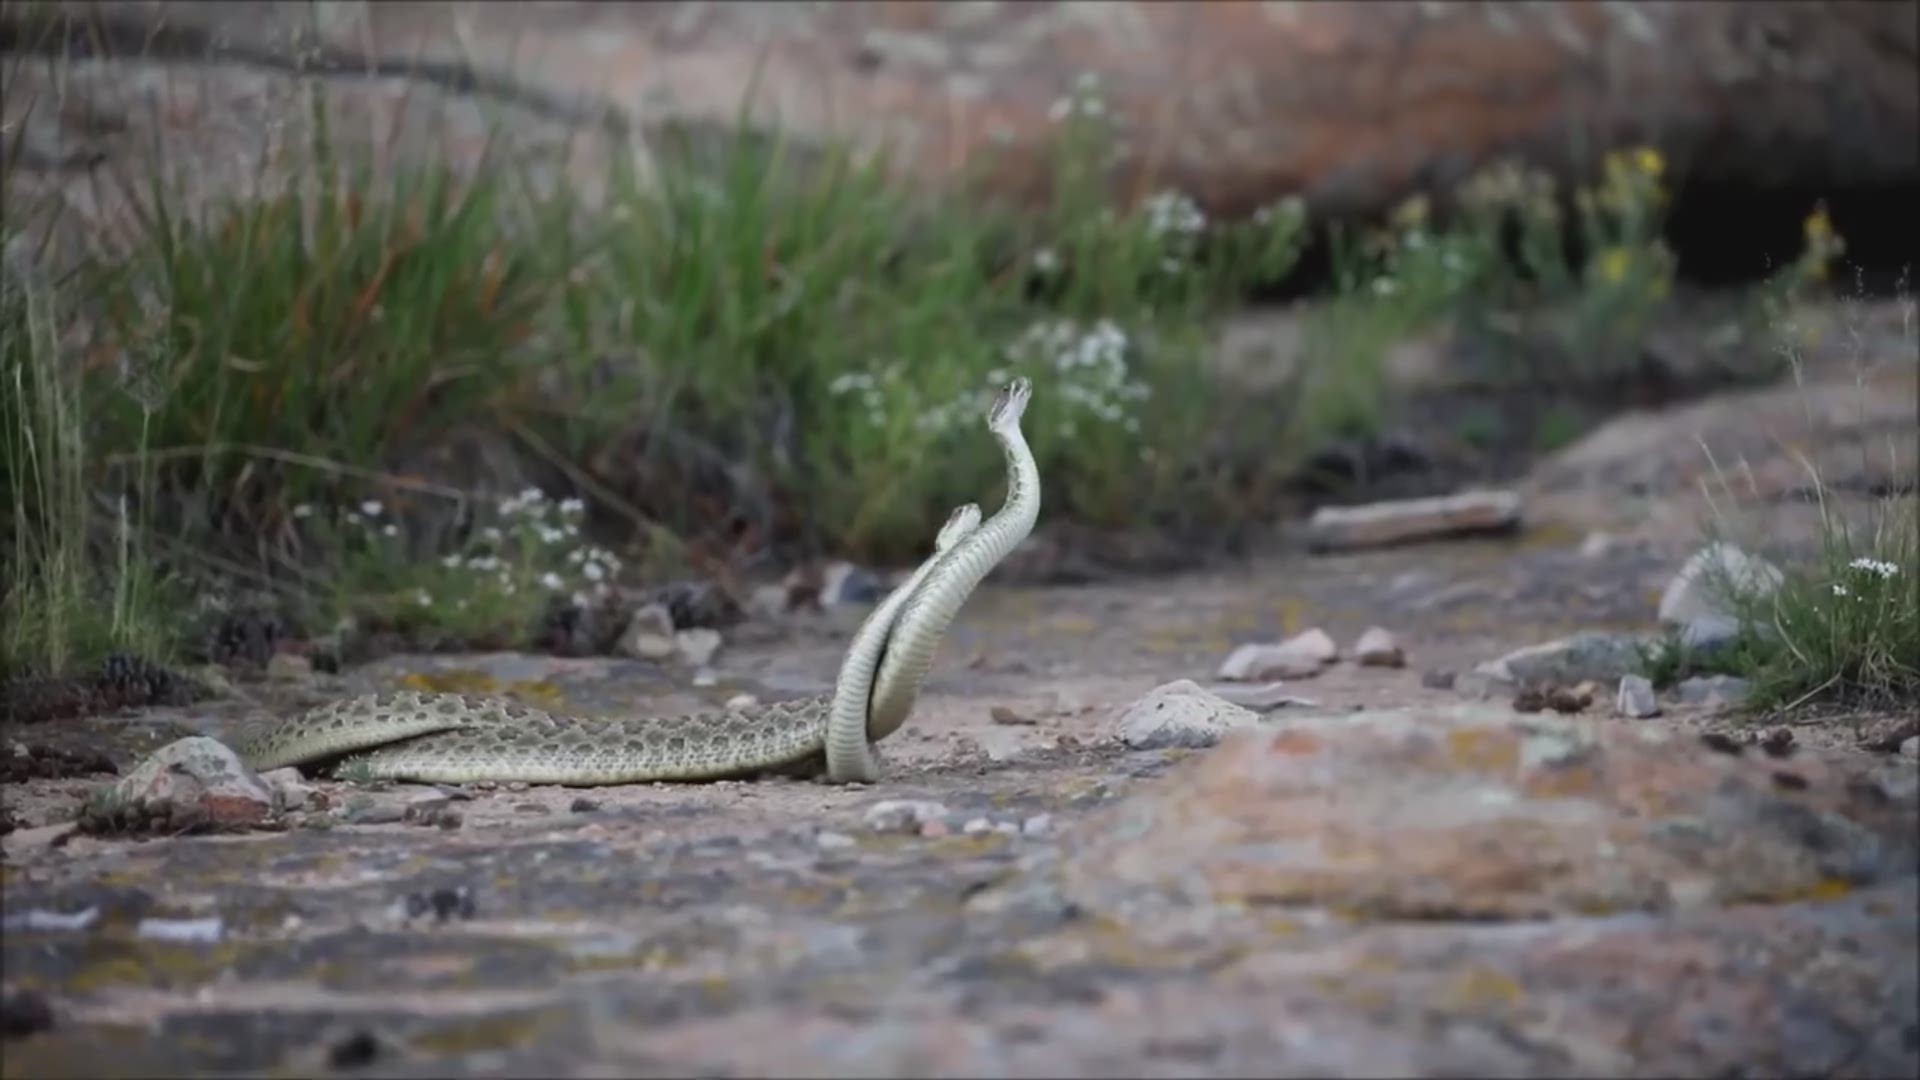 These two snakes were battling it out for the attention of a nearby female in Castlewood Canyon yesterday! Center for Snake Conservation expert Cameron Young said the winner gets the female (if he can protect her long enough for her to show interest). (Video courtesy Shaun Wilsey)